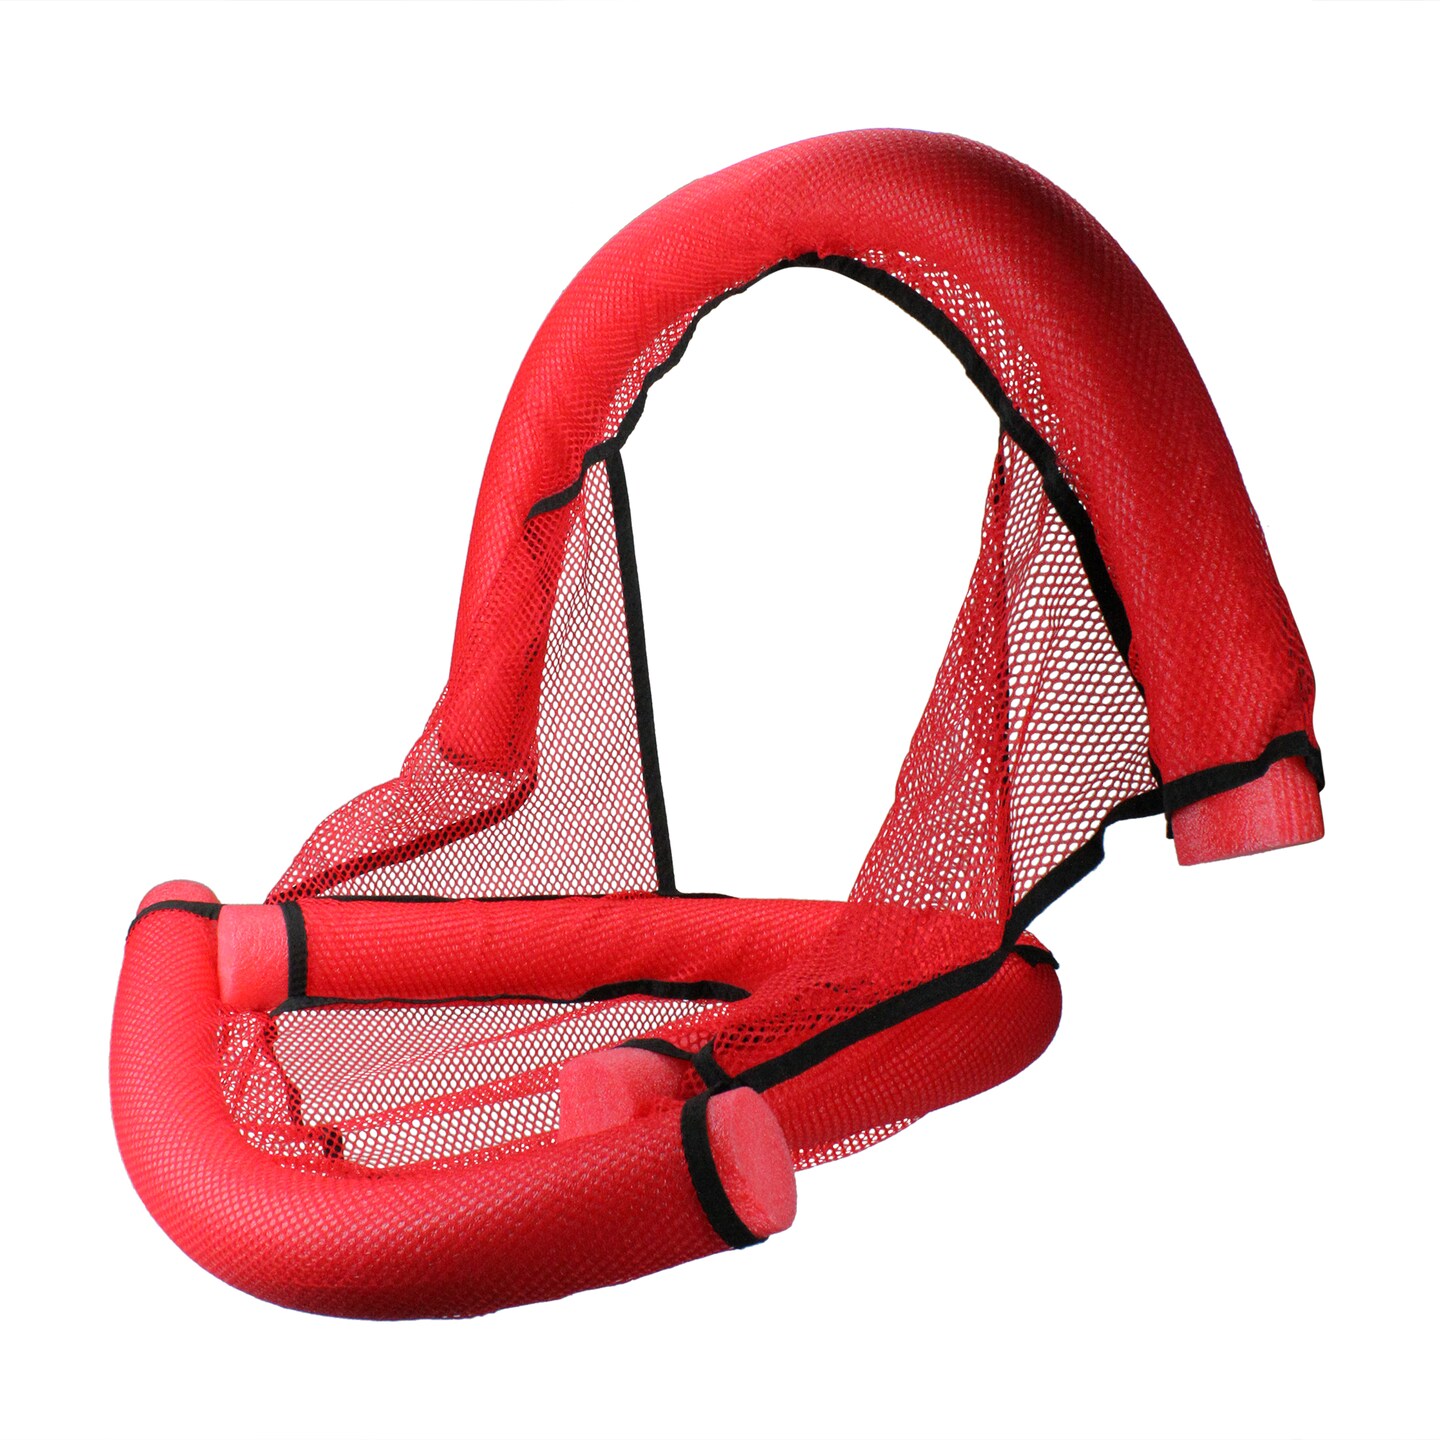 Swim Central Inflatable Red and Black Foam Noodle Fun Seat , 30-Inch